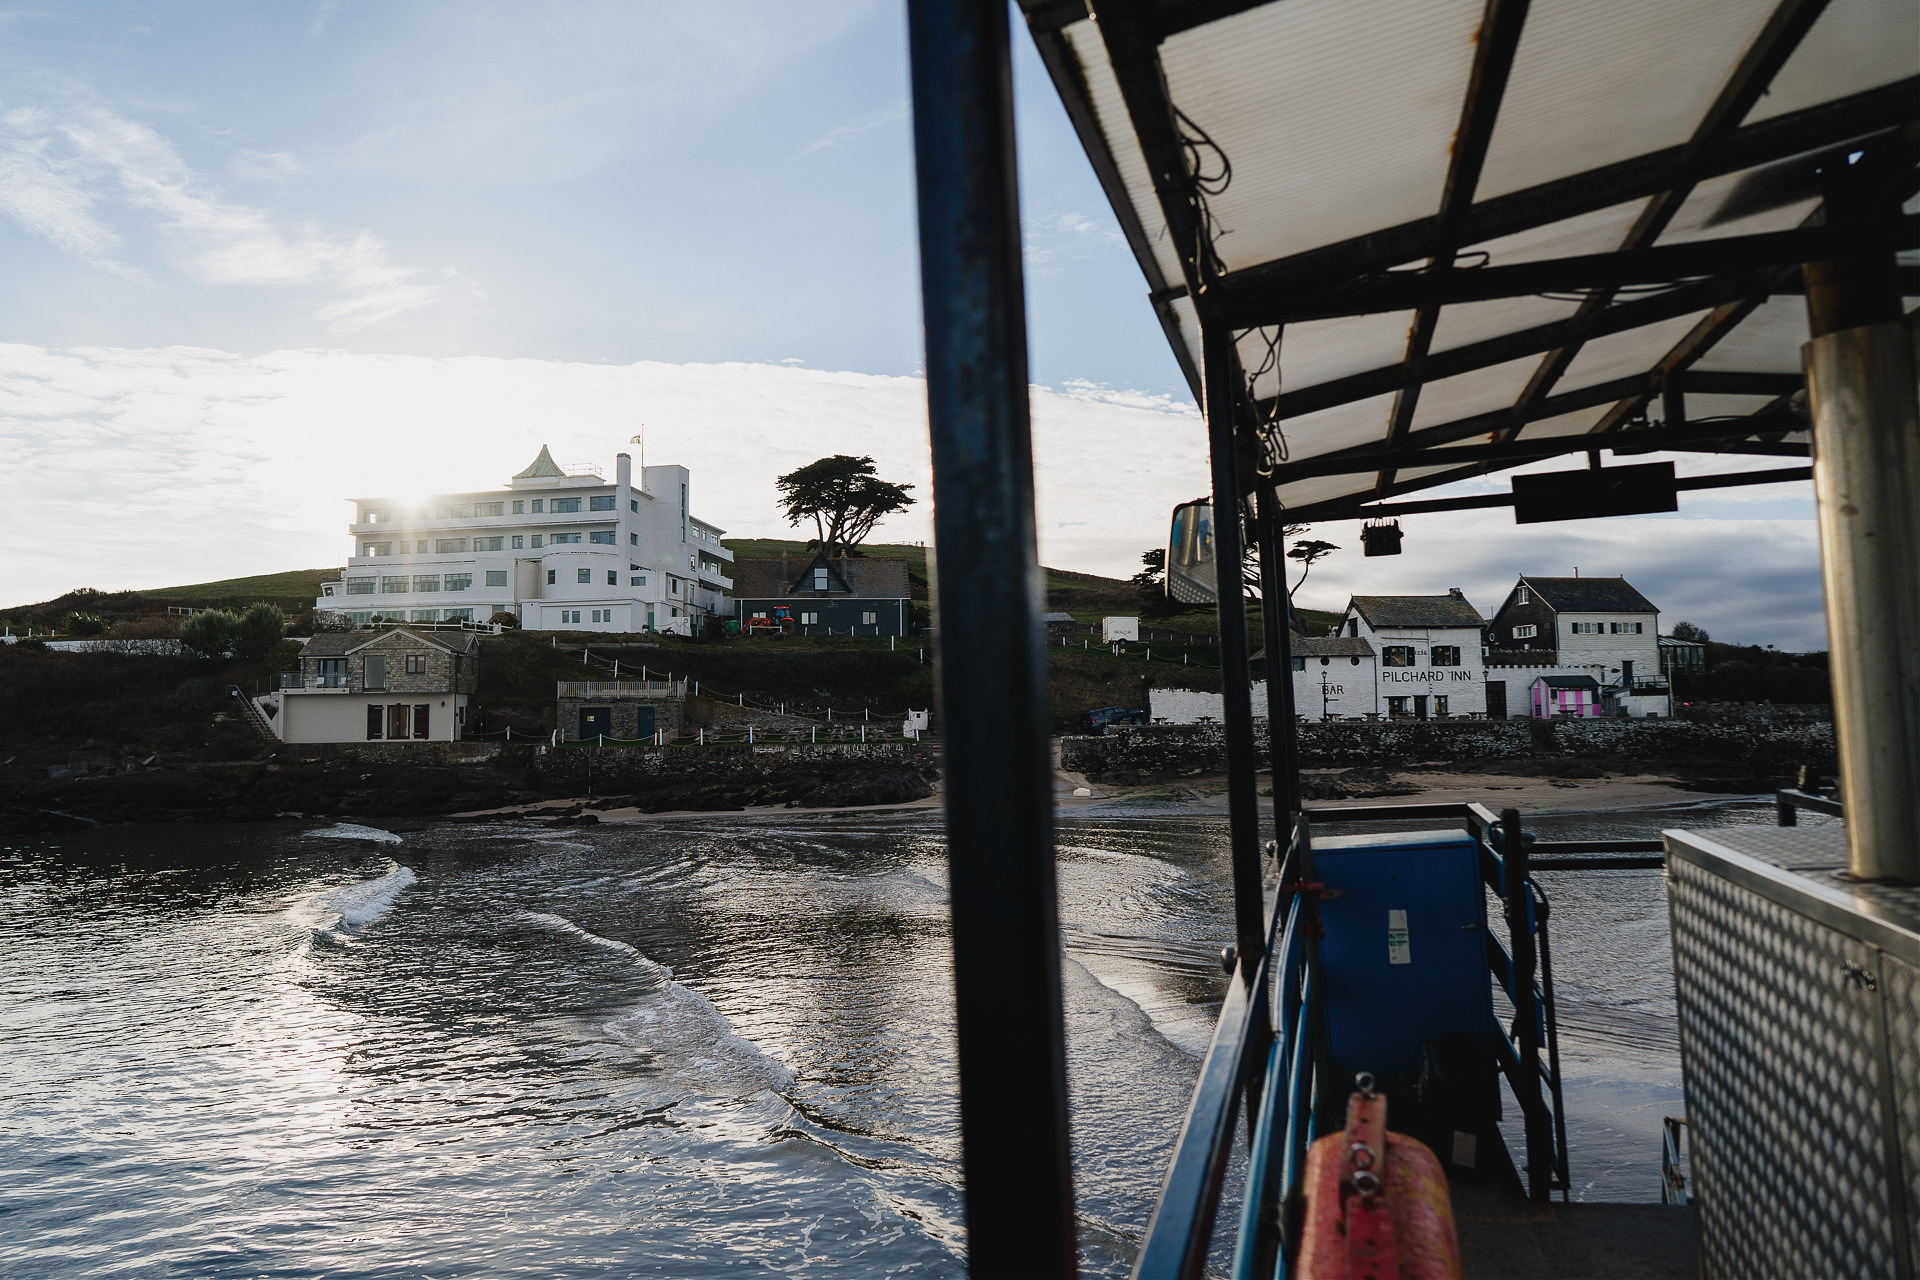 View of Burgh Island Hotel from the sea tractor